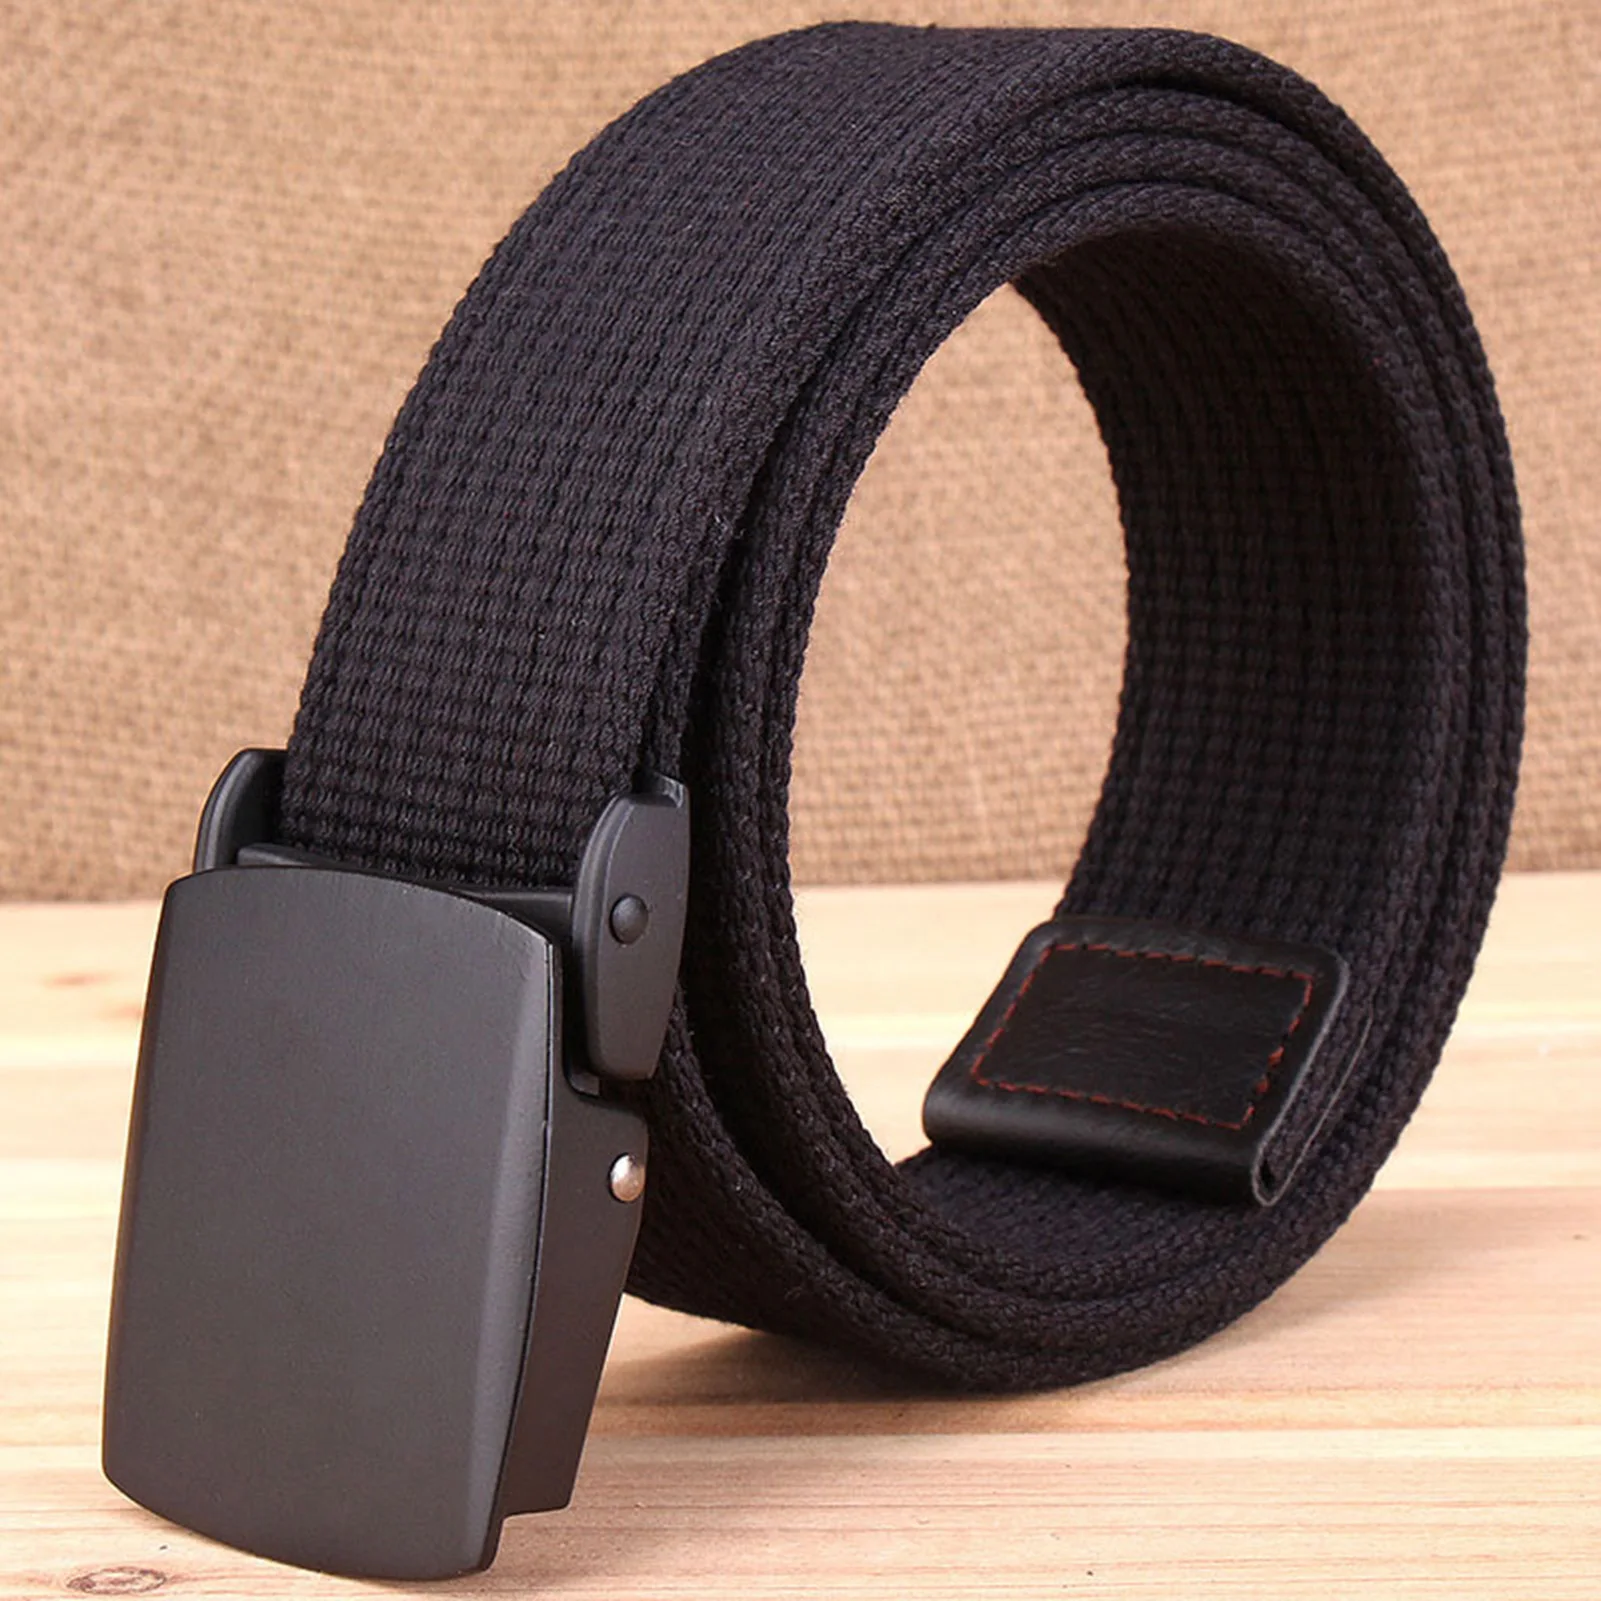 Woven Stretch Braided Belts Width Training Leisure Adjustable Casual Weave Belt for Match-up with Jeans H9